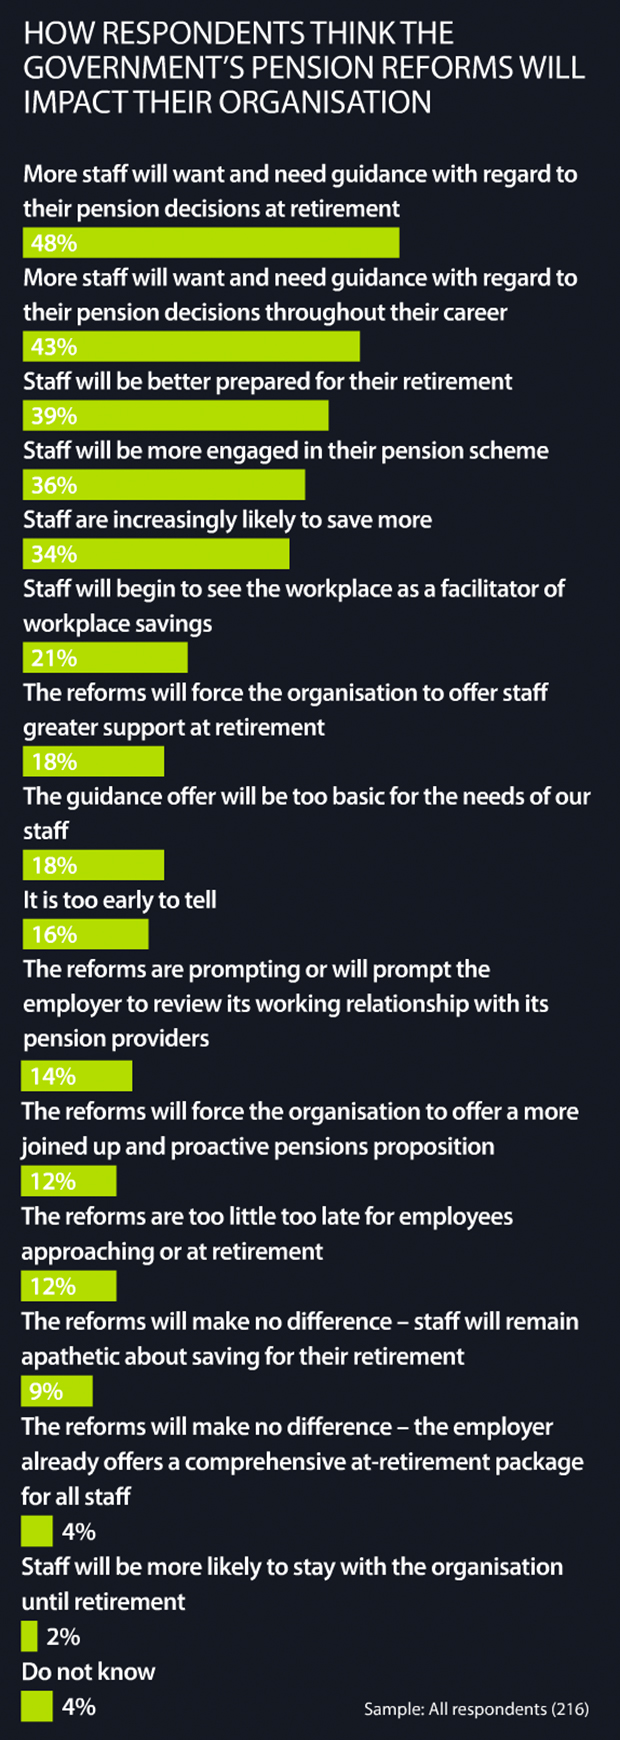 How respondents think the government's pension reforms will impact their organisation